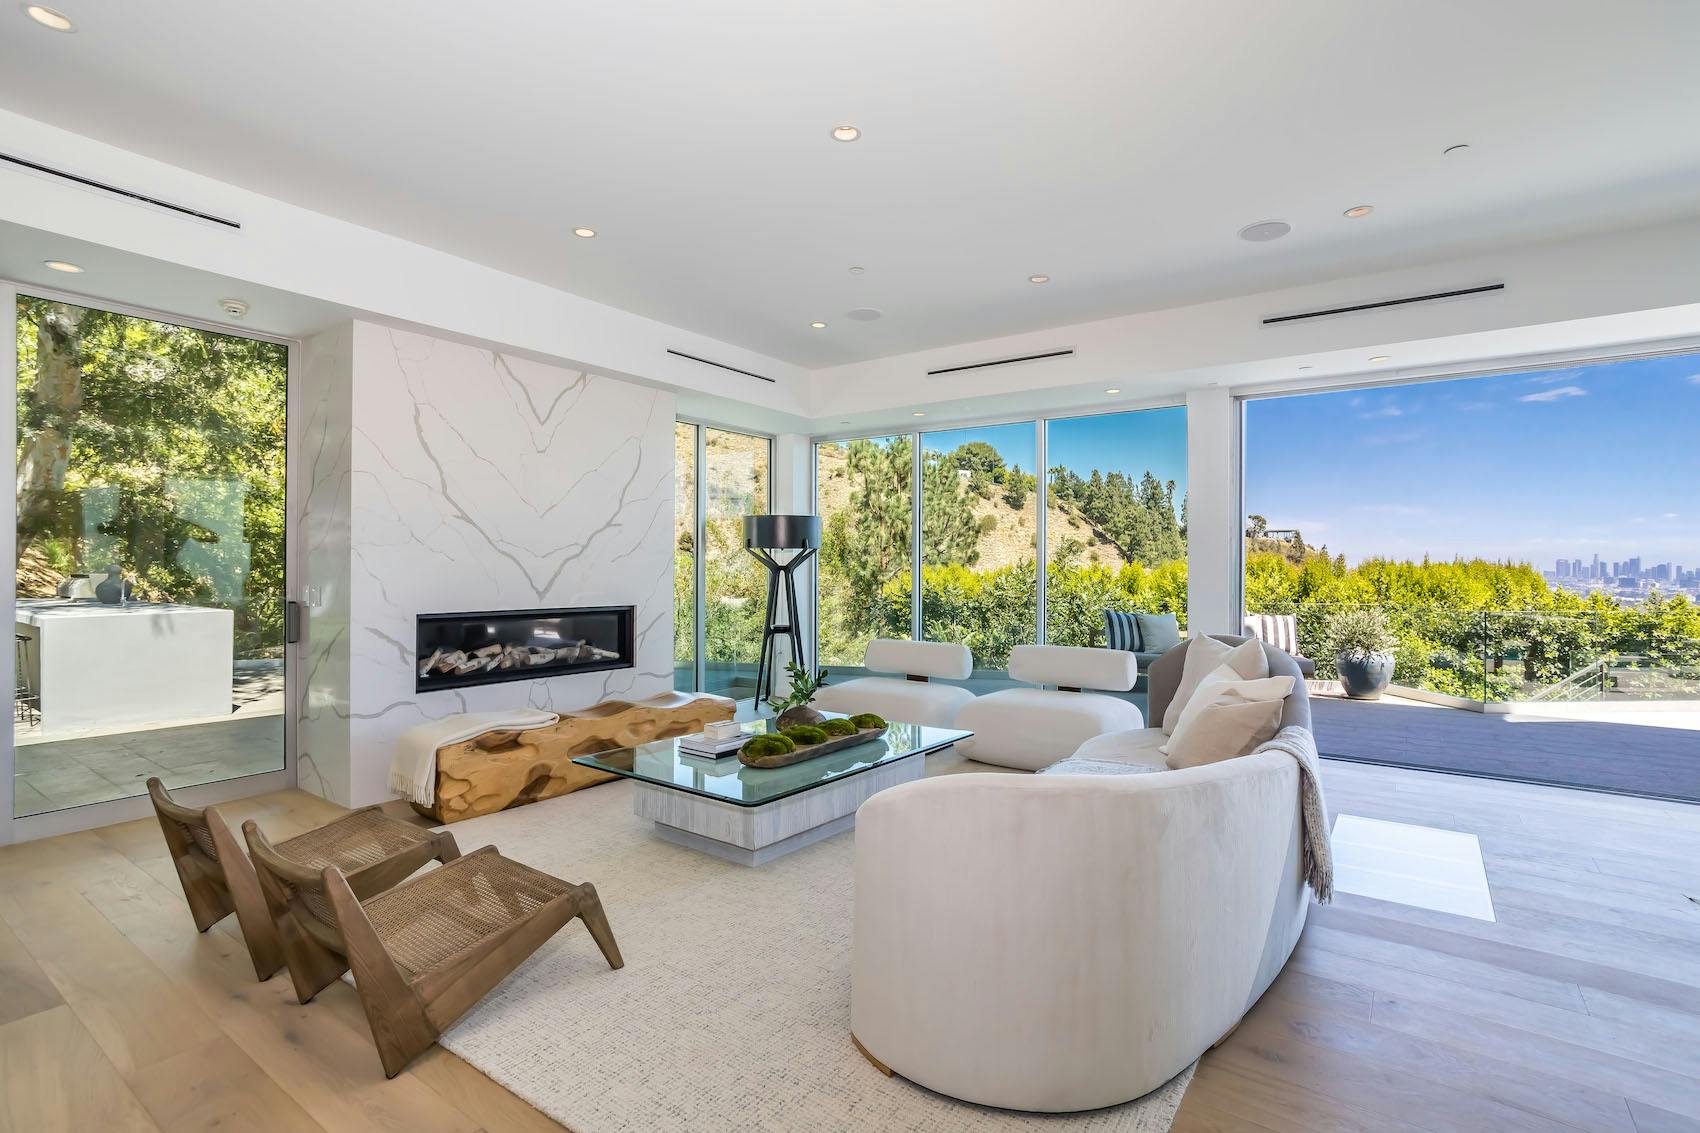 Meridith-Baer-Home-Home-Staging-Southern-California-Sunset-Strip-Contemporary-Luxury-Homes-Modern-and-Contemporary-Living-Room